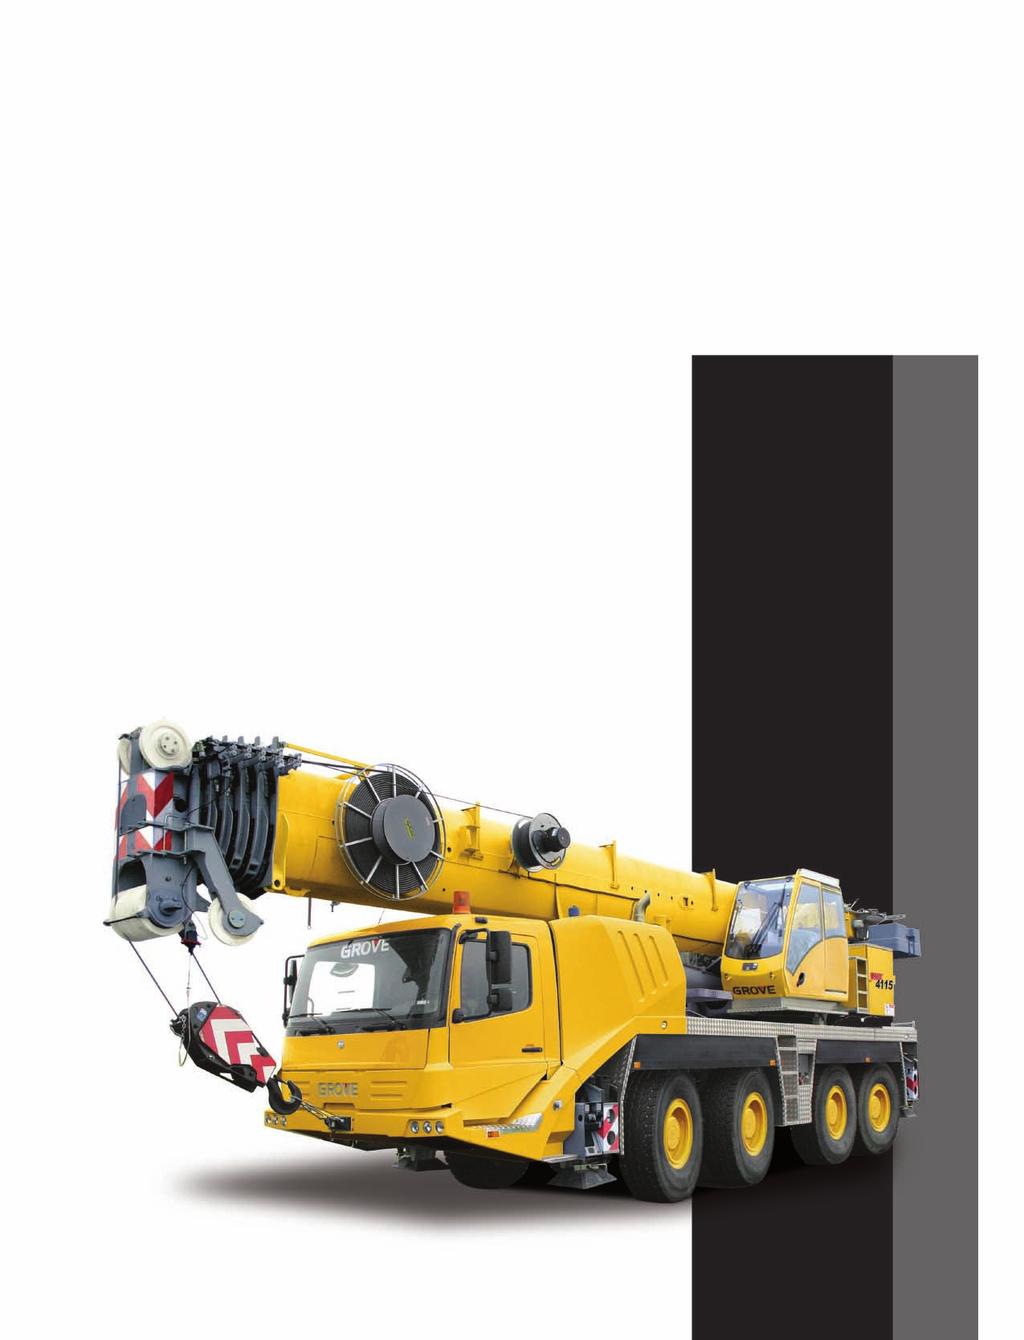 product guide features 115-ton (100 mt) capacity 37-171 ft. (11.3-52 m) 6 section full power Mega Form boom with Twin Lock pinning 33-56 ft. (10-17 m) hydraulic offset bi-fold swingaway 2 X 16 ft.